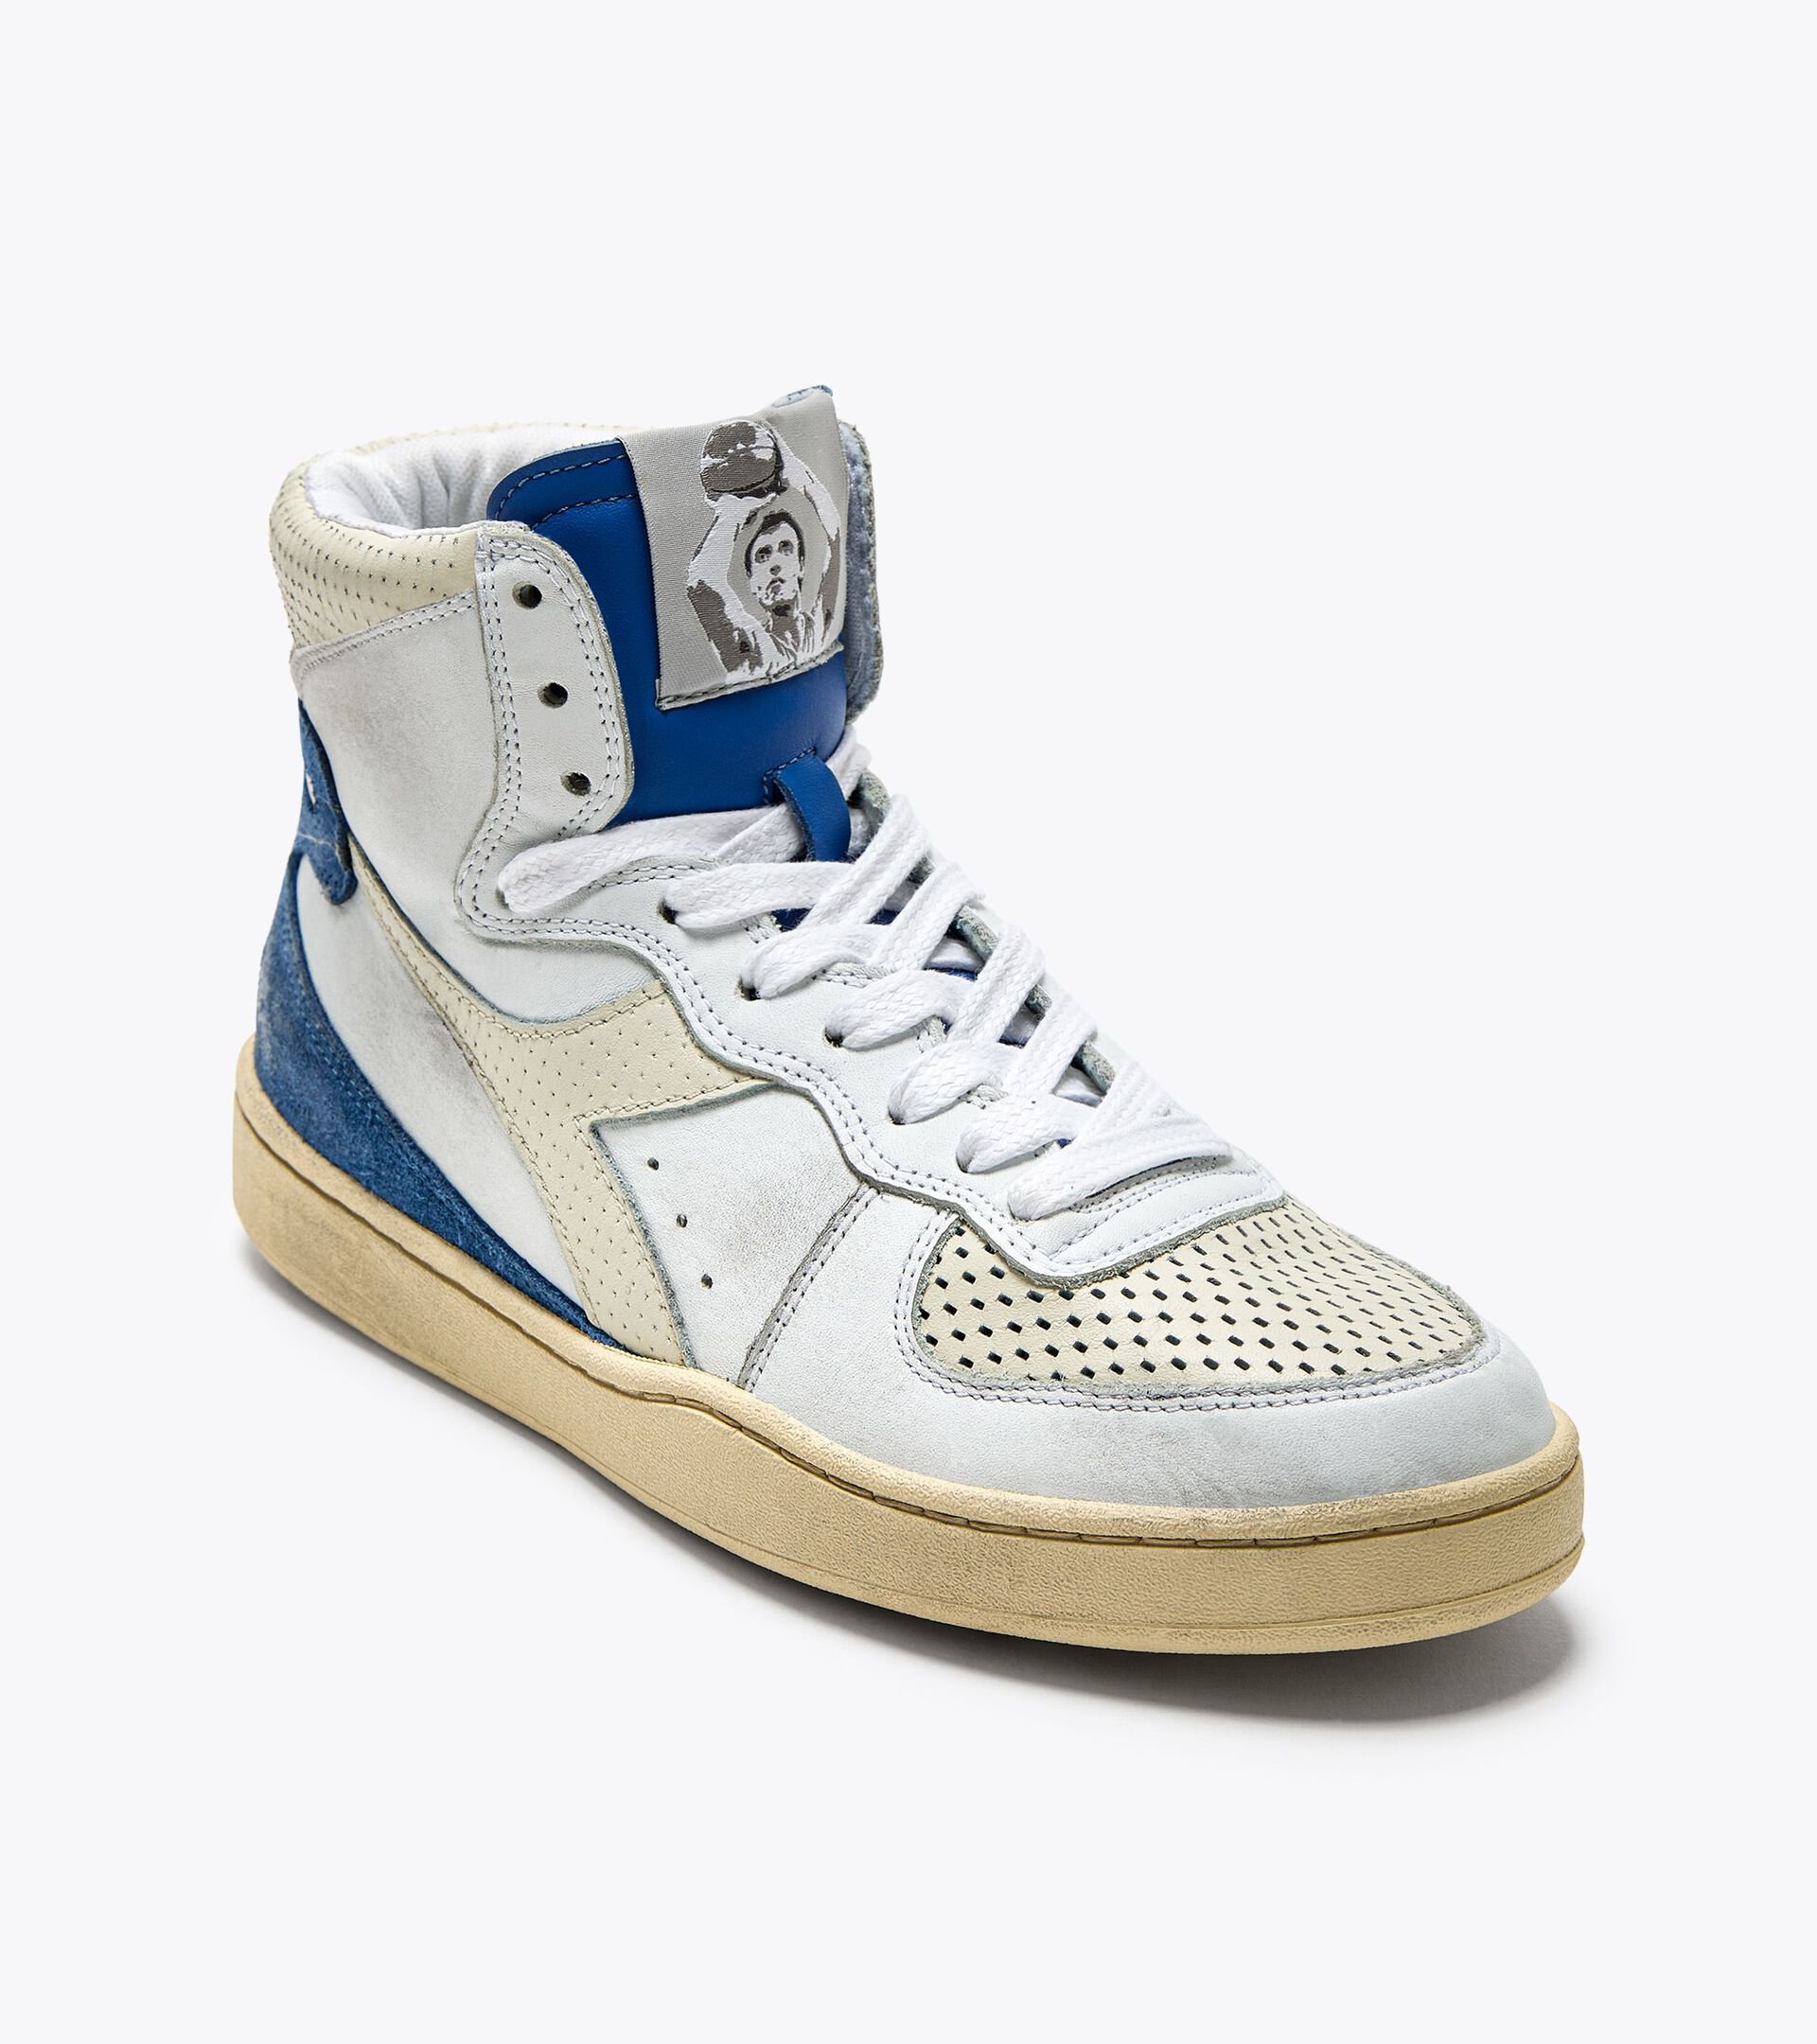 Chaussures Heritage - Made in Italy - Gender neutral MI BASKET PUNCHED ITA X DINO MENEGHIN BLC/BLEU DELFT - Diadora